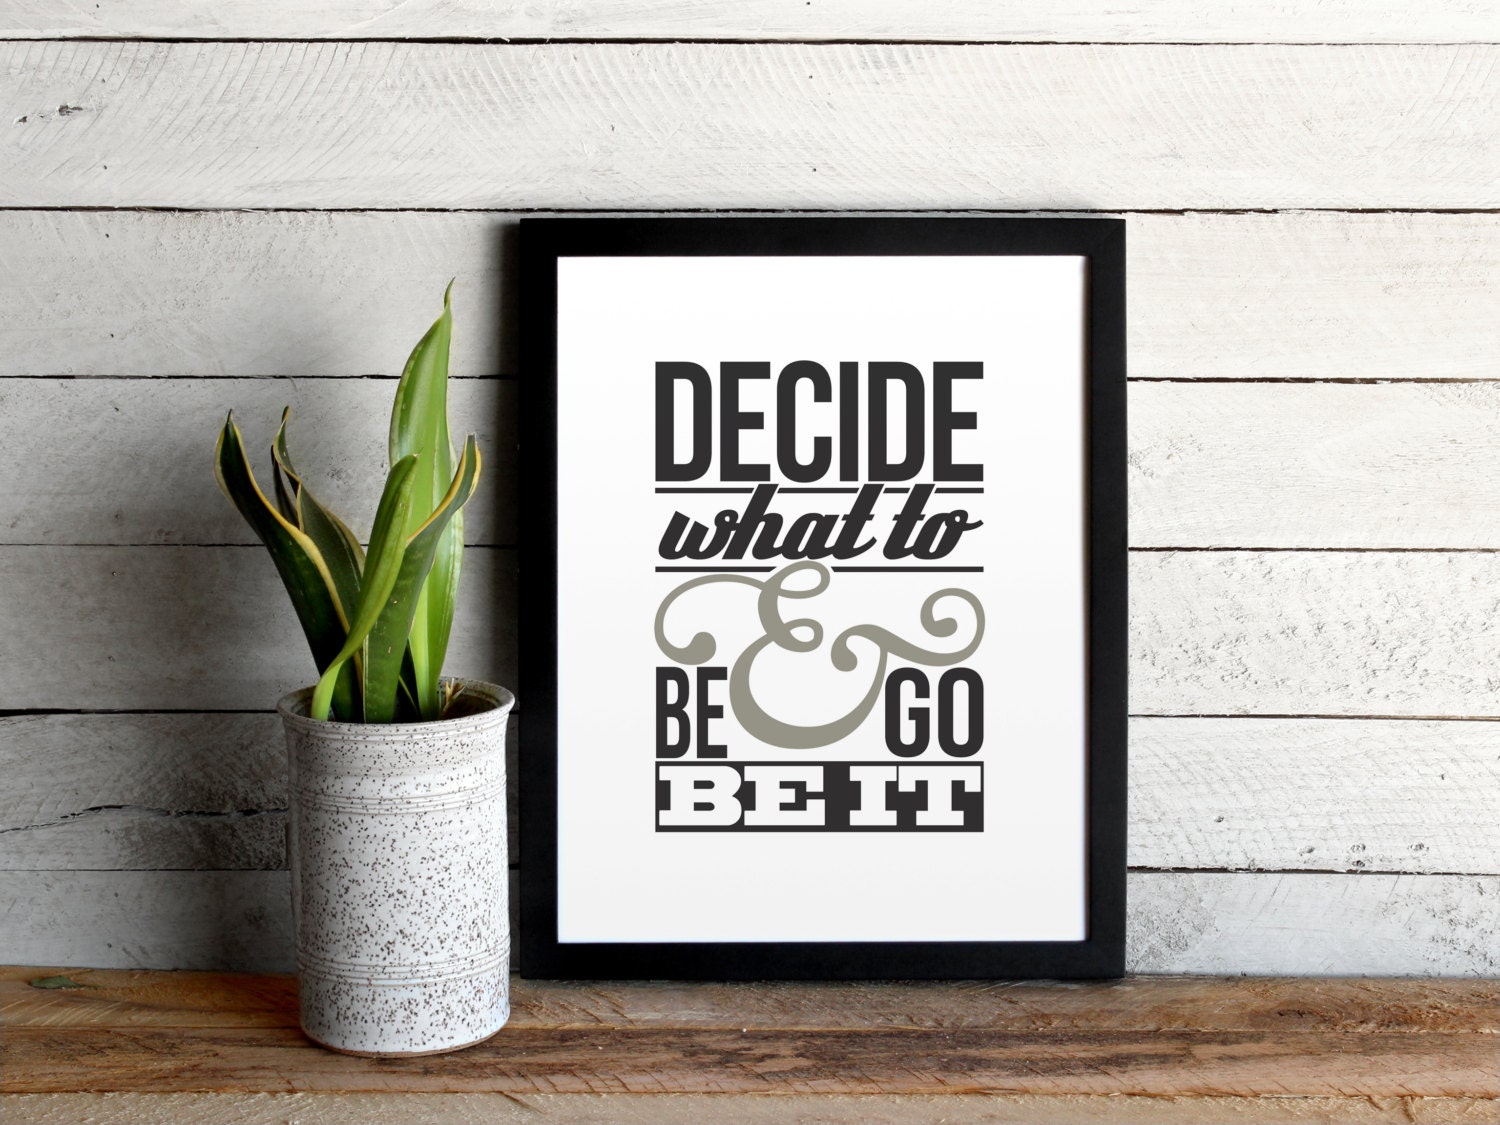 The Avett Brothers Poster - "Decide What To Be & Go Be It" - Head Full of Doubt/Road Full of Promise Song Lyrics Print - Christmas Gift